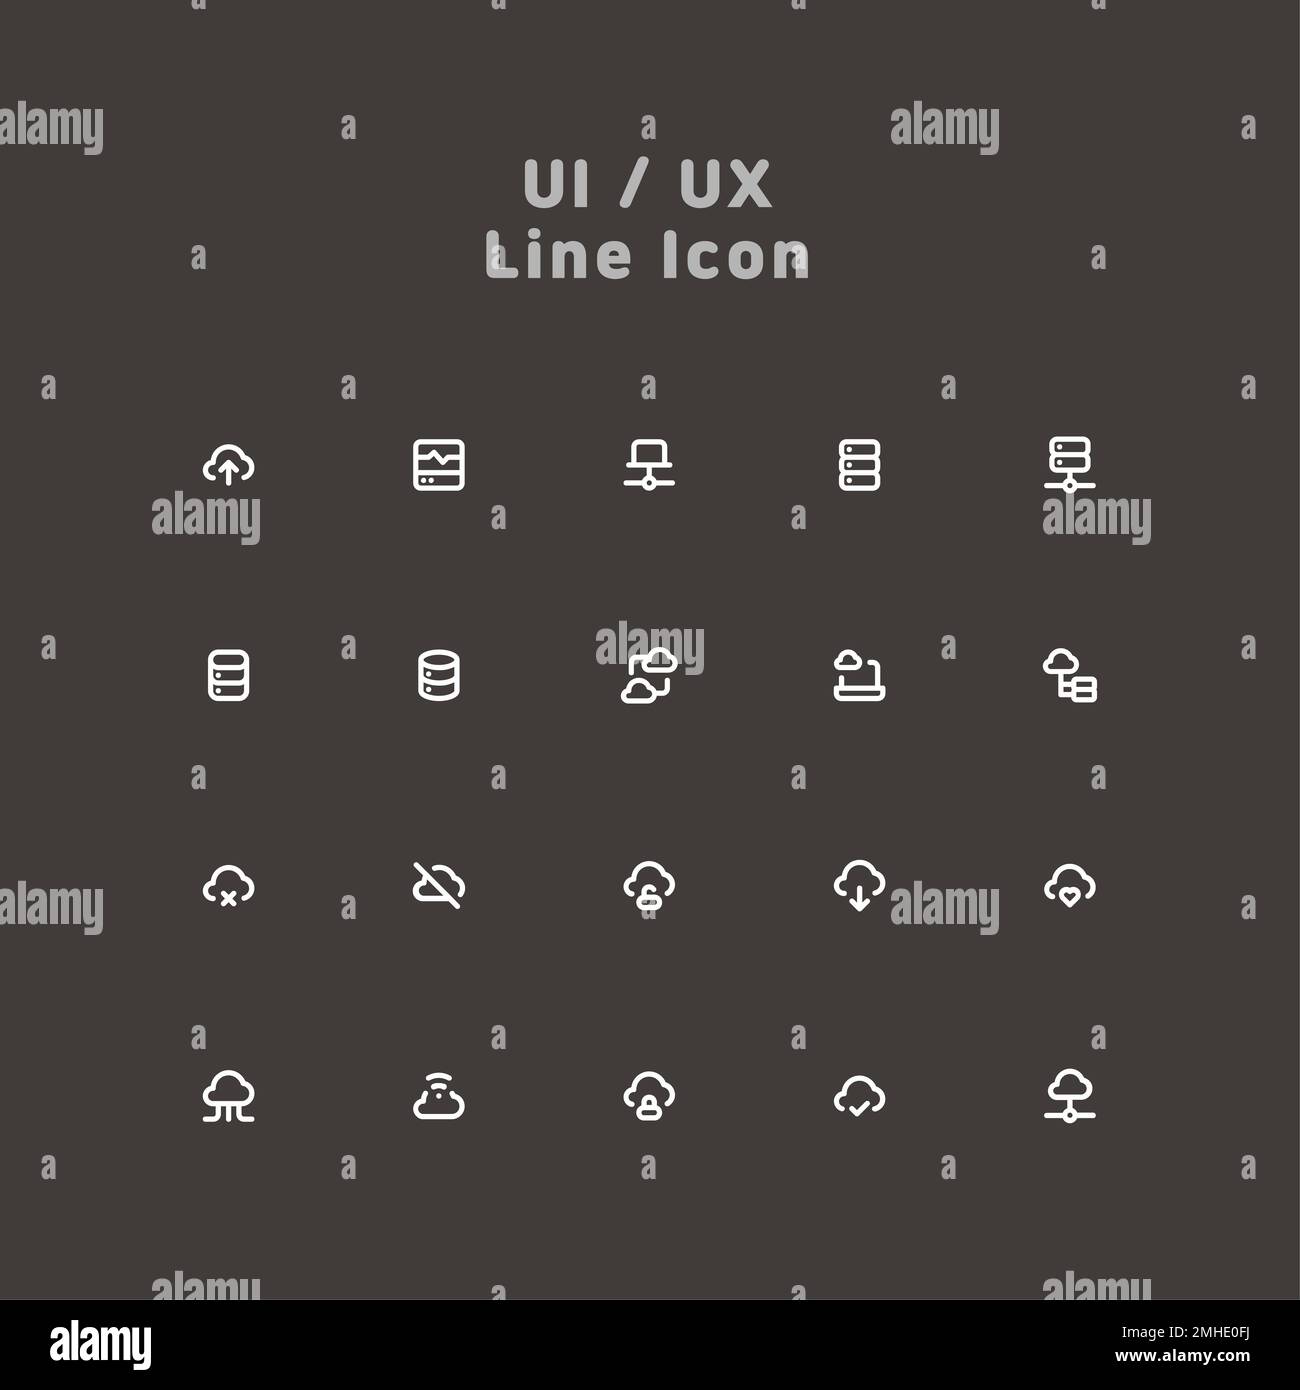 IconExperience » I-Collection » Id Card Icon